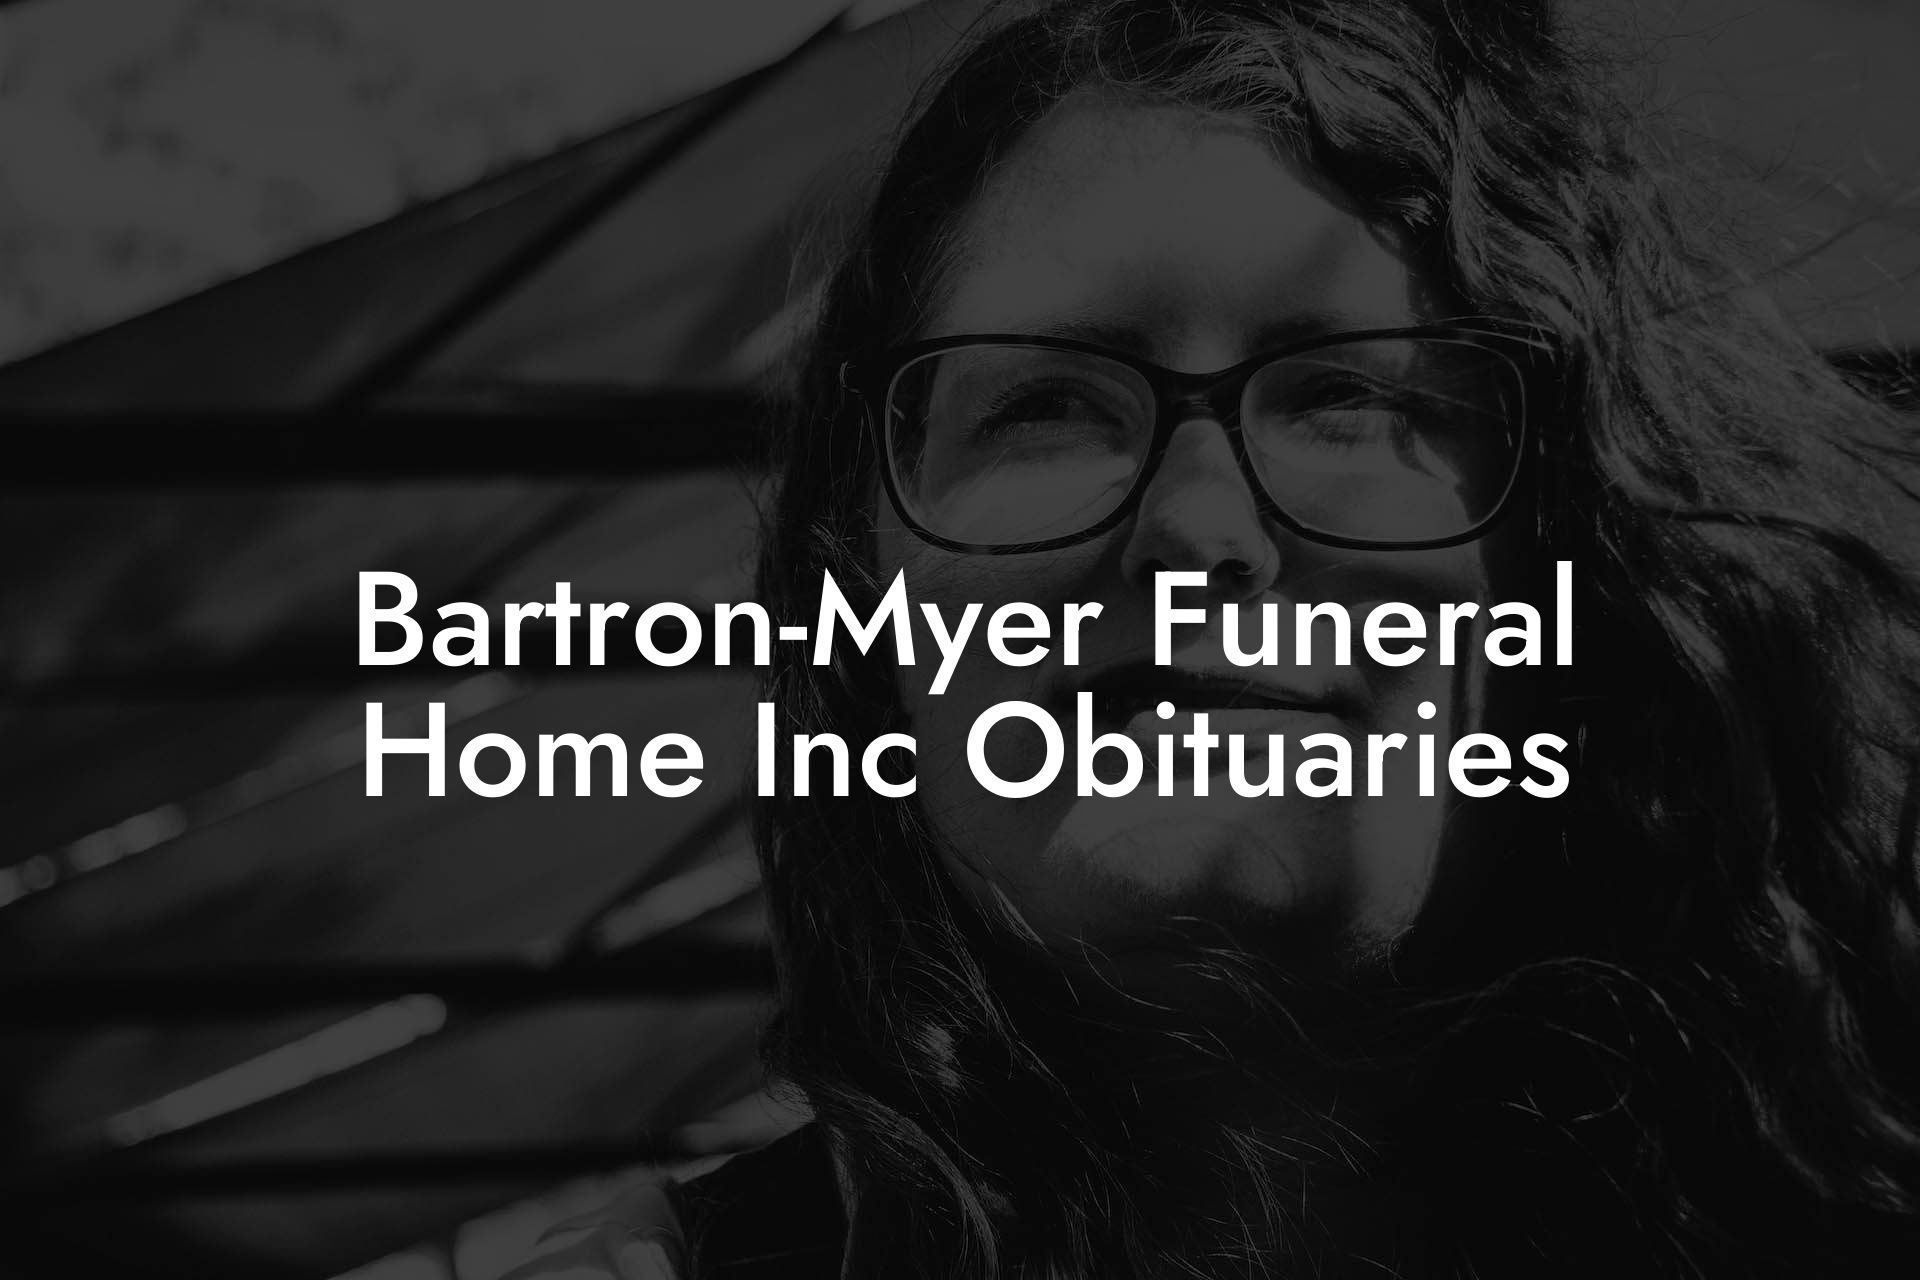 Bartron-Myer Funeral Home Inc Obituaries